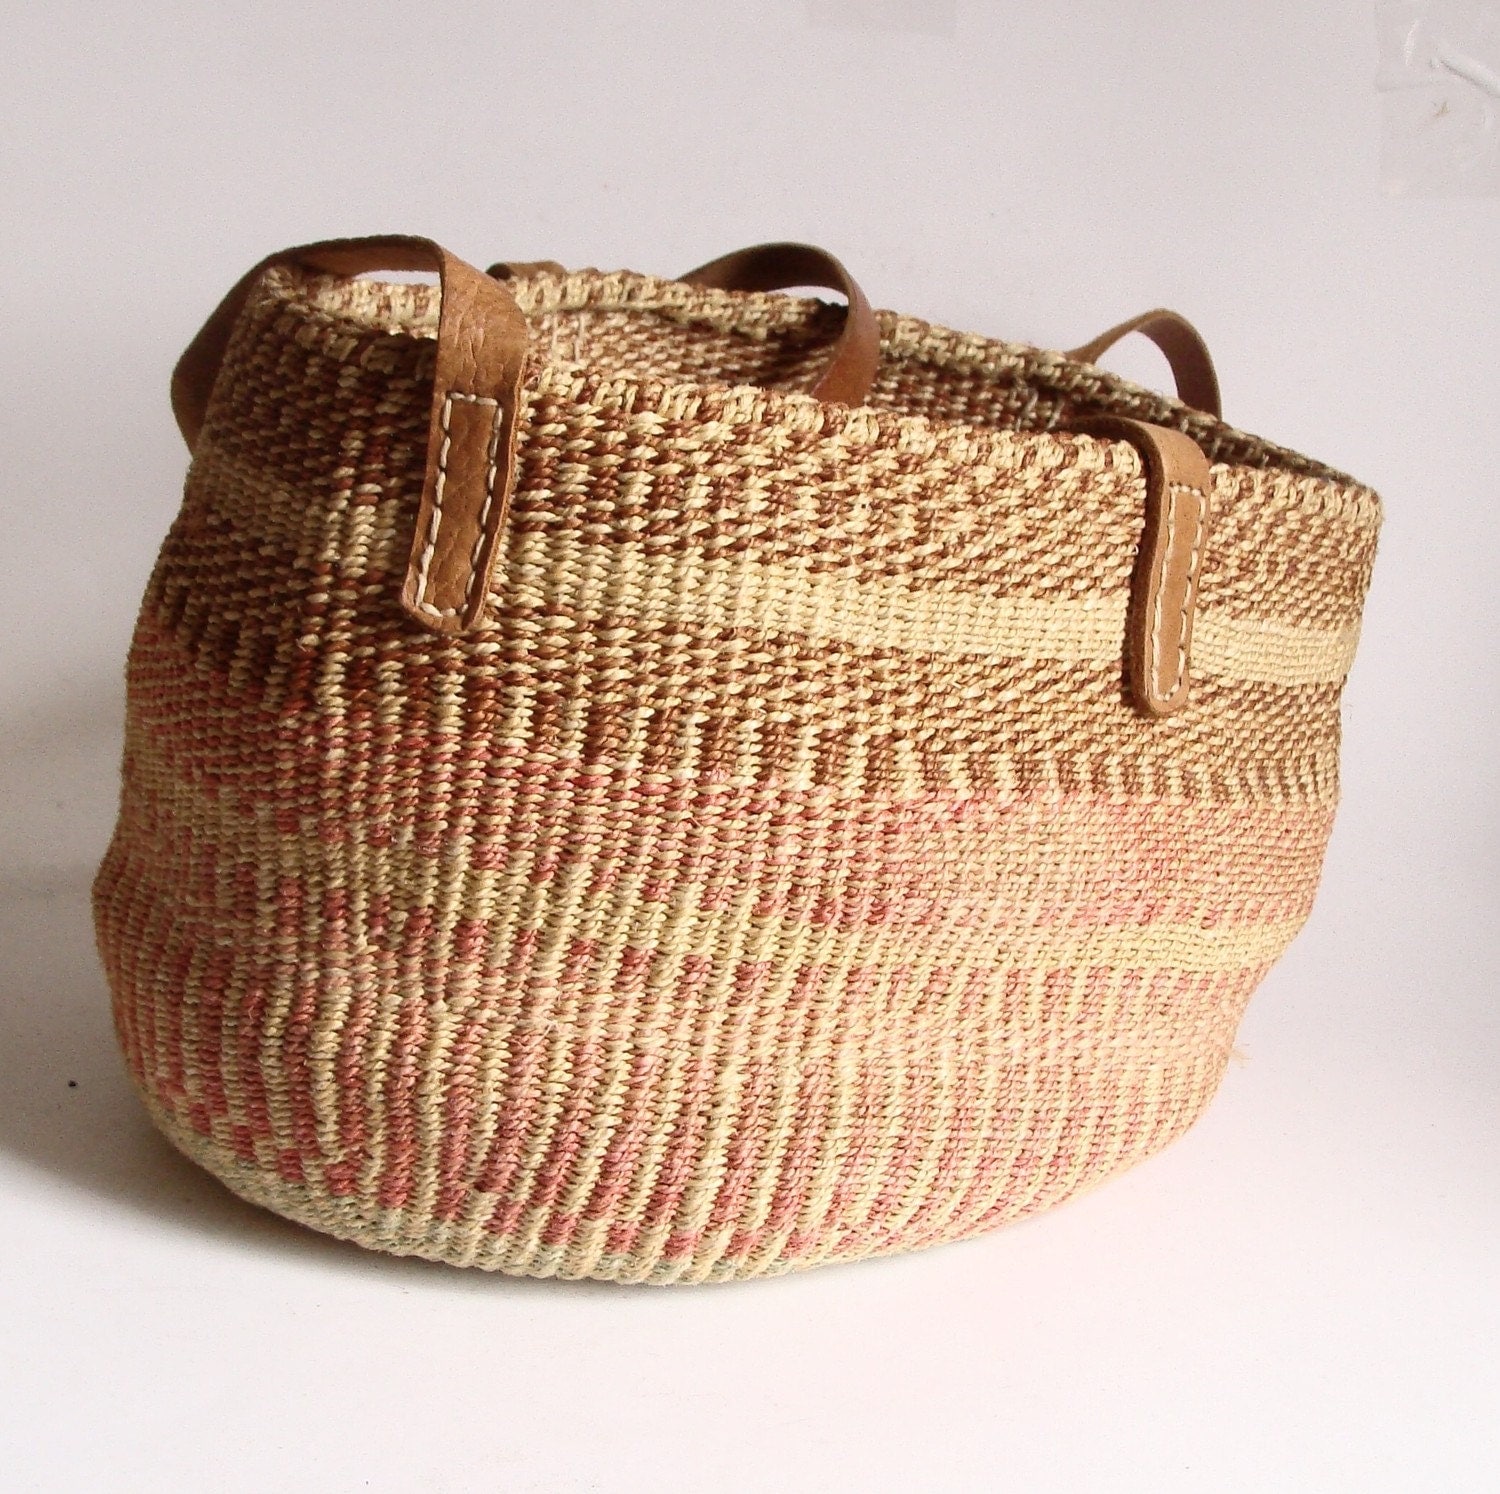 Vtg Woven Straw Bag with Leather Straps by OldBaltimoreVintage